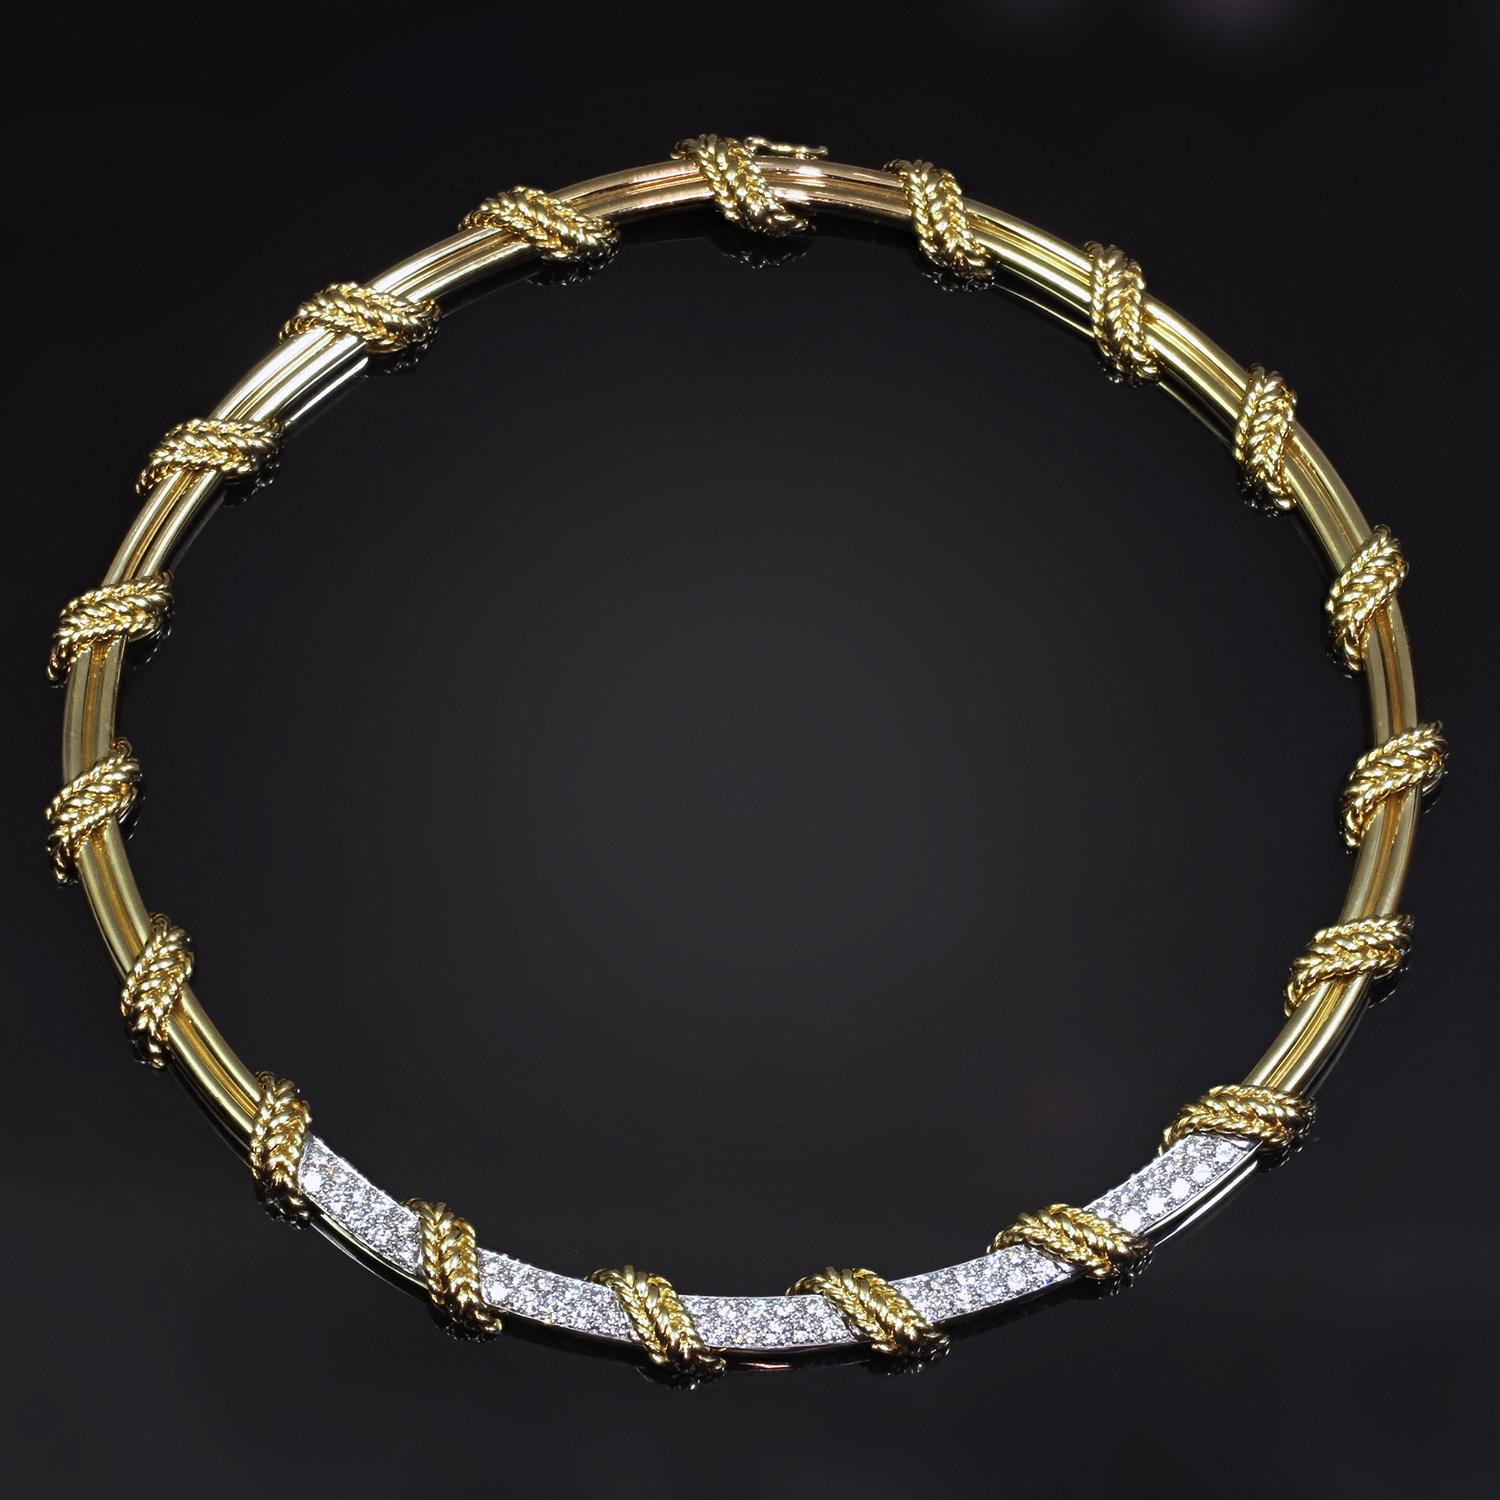 This exquisite Tiffany & Co. necklace is crafted in 18k yellow & white gold and set with round brilliant E-F VVS2-VS1 diamonds weighing an estimated 3.50 - 4.0 carats. Made in United States circa 1980s. Measurements: 0.51